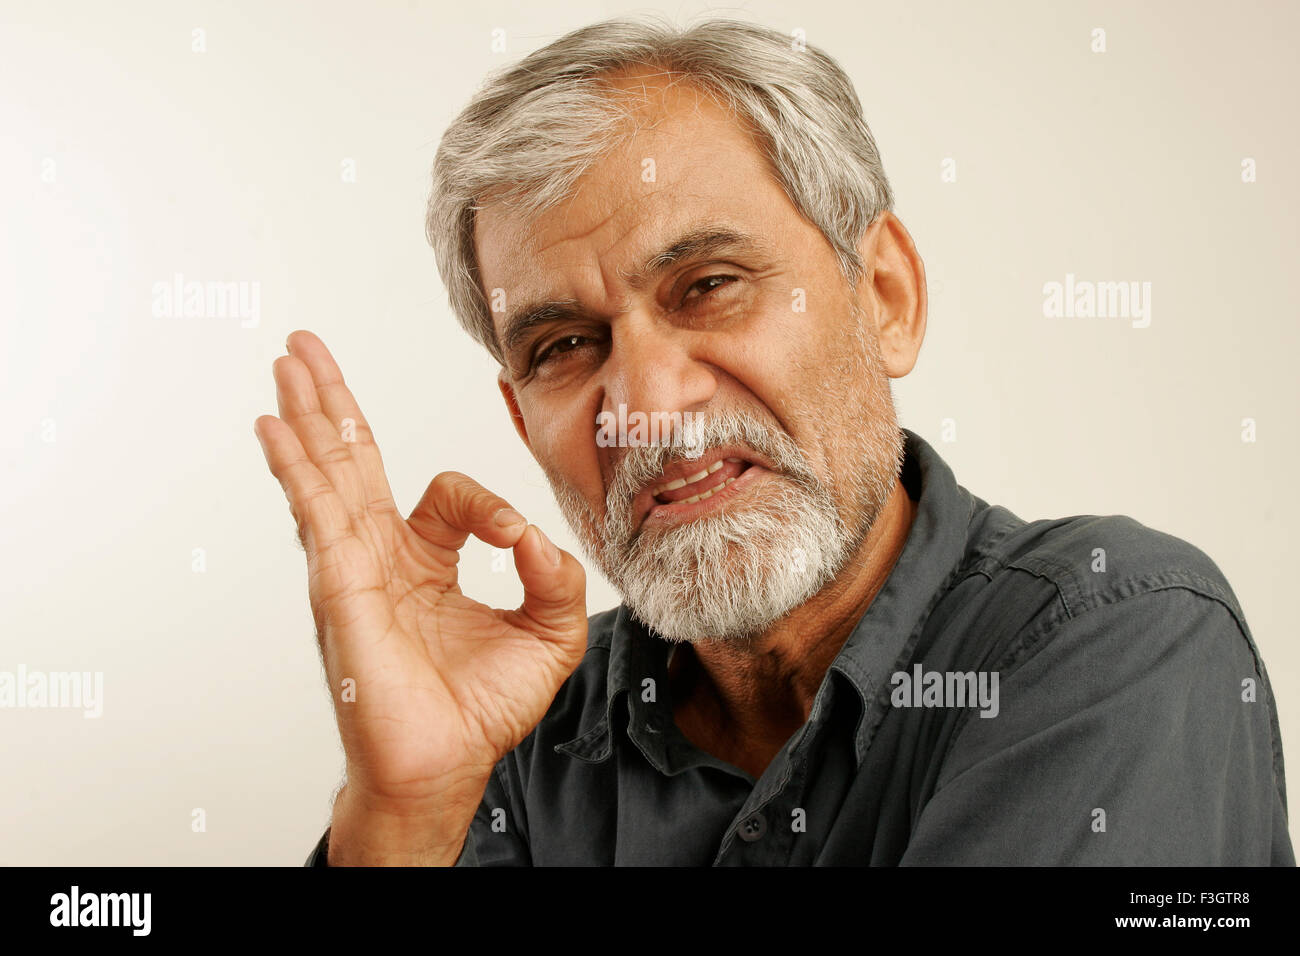 man late fifties gray hair beard wearing blue shirt expressing indicating aggressively top hand finger thumb touching Stock Photo